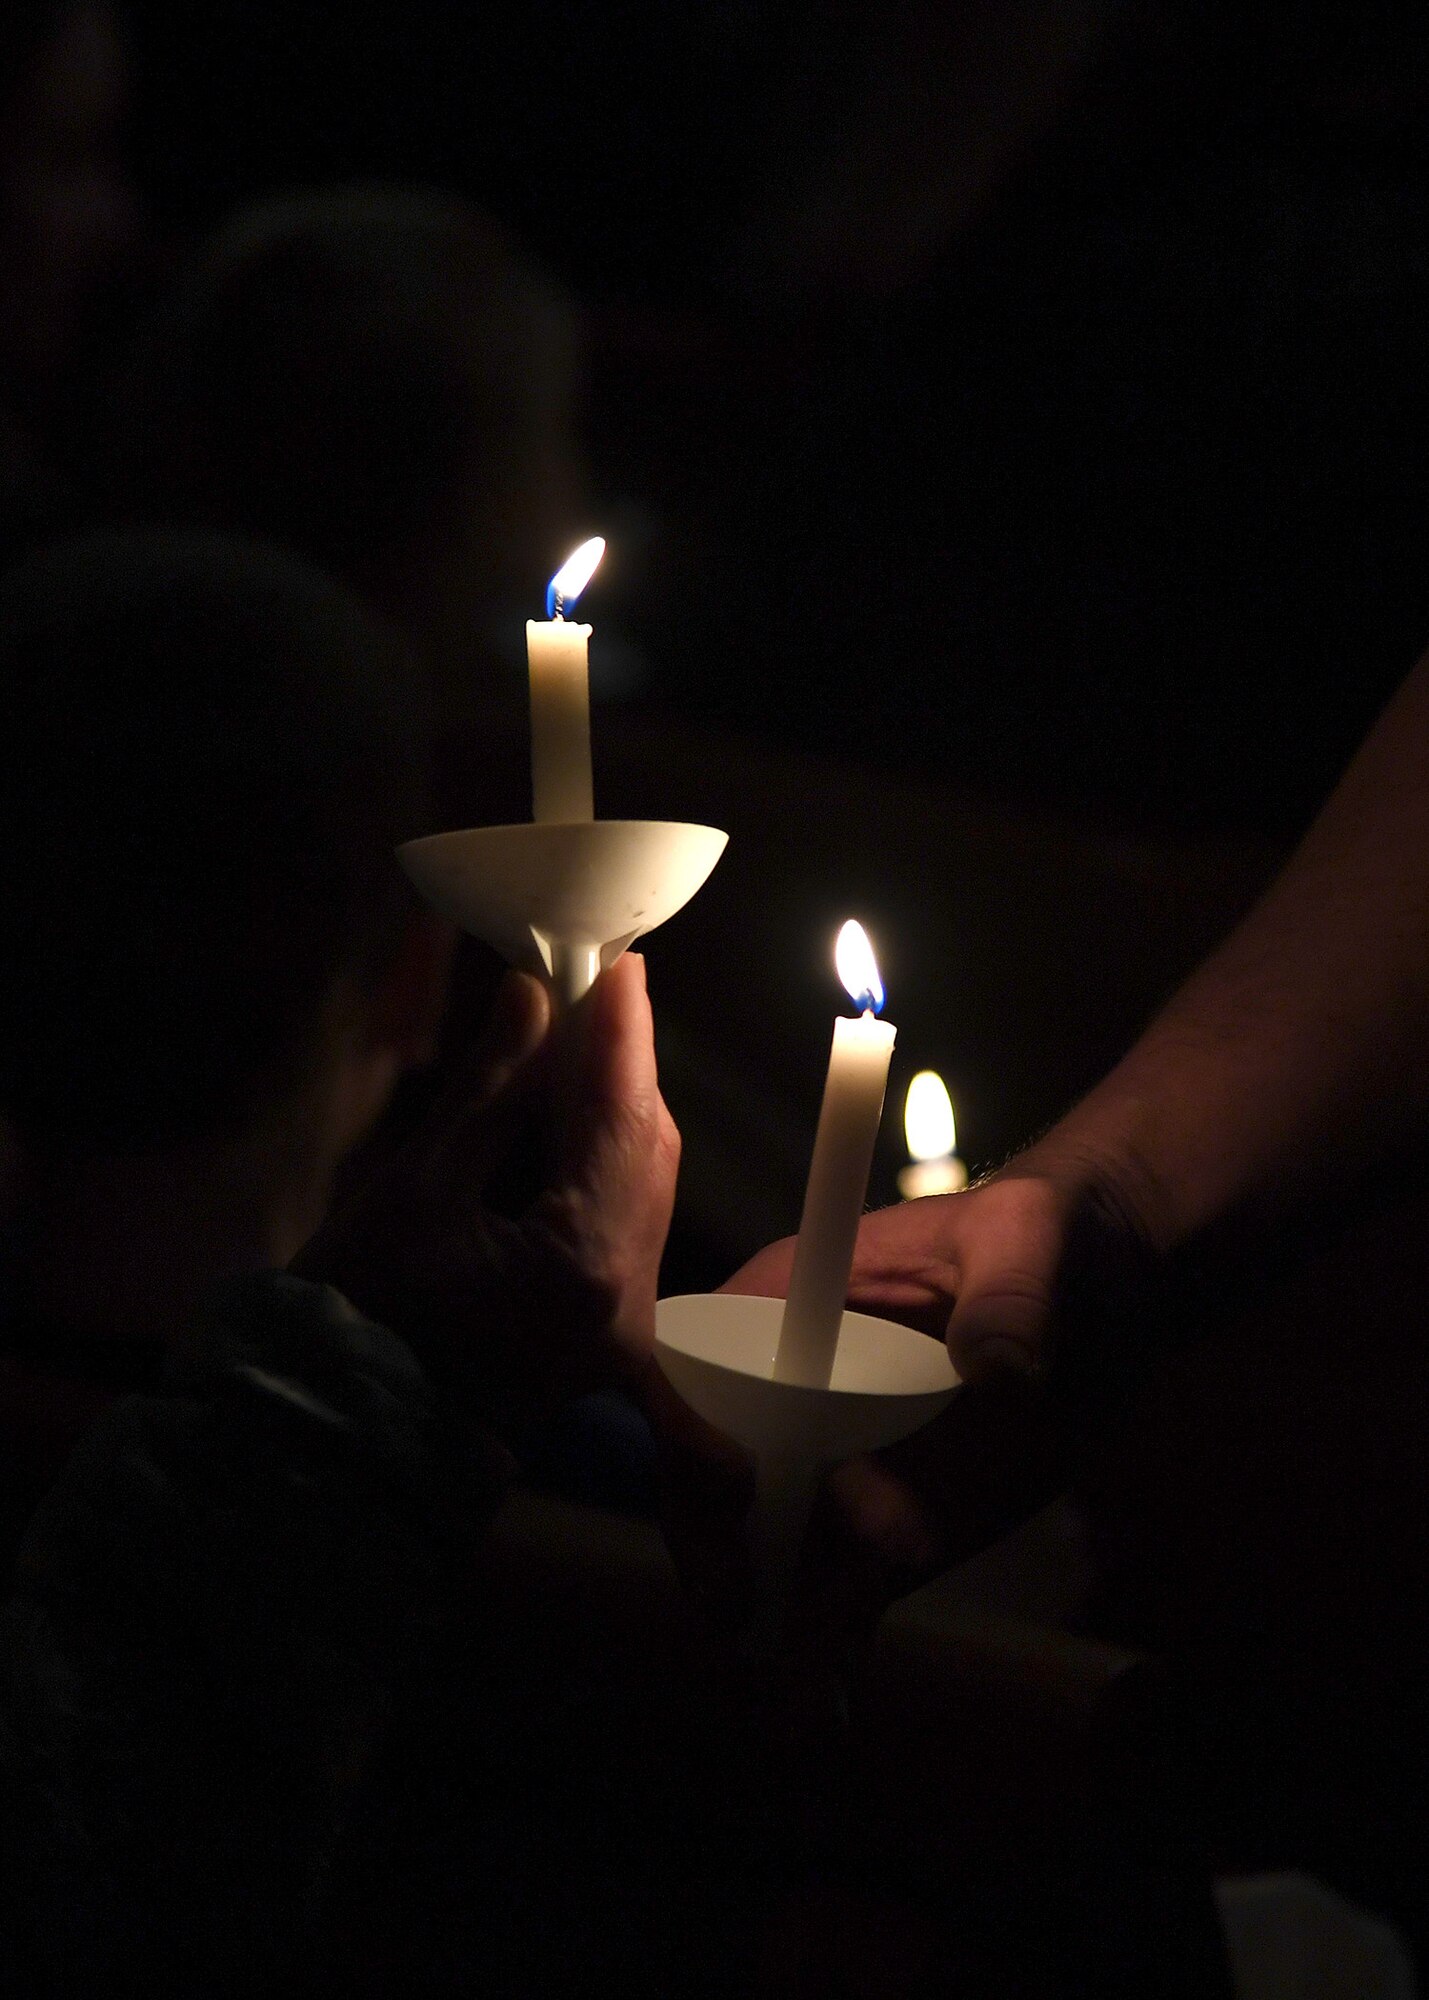 Members who attended a candlelight vigil in honor of the Dean family share a flame to light candles handed to all who joined the memorial November 28, 2018, in St. Timothy’s Catholic Church in Manvel, North Dakota. Staff Sgt. Anthony James Dean, his wife Chelsi Kay Dean, and their two children Kaytlin Merie Dean, 5, and Avri James Dean, 1, were all killed in a vehicle accident during the Thanksgiving holiday near Billings, Montana. Those who spoke at the memorial recalled fond memories of each family member, detailing how involved they were in the community. (U.S. Air Force photo by Airman 1st Class Elora J. Martinez)